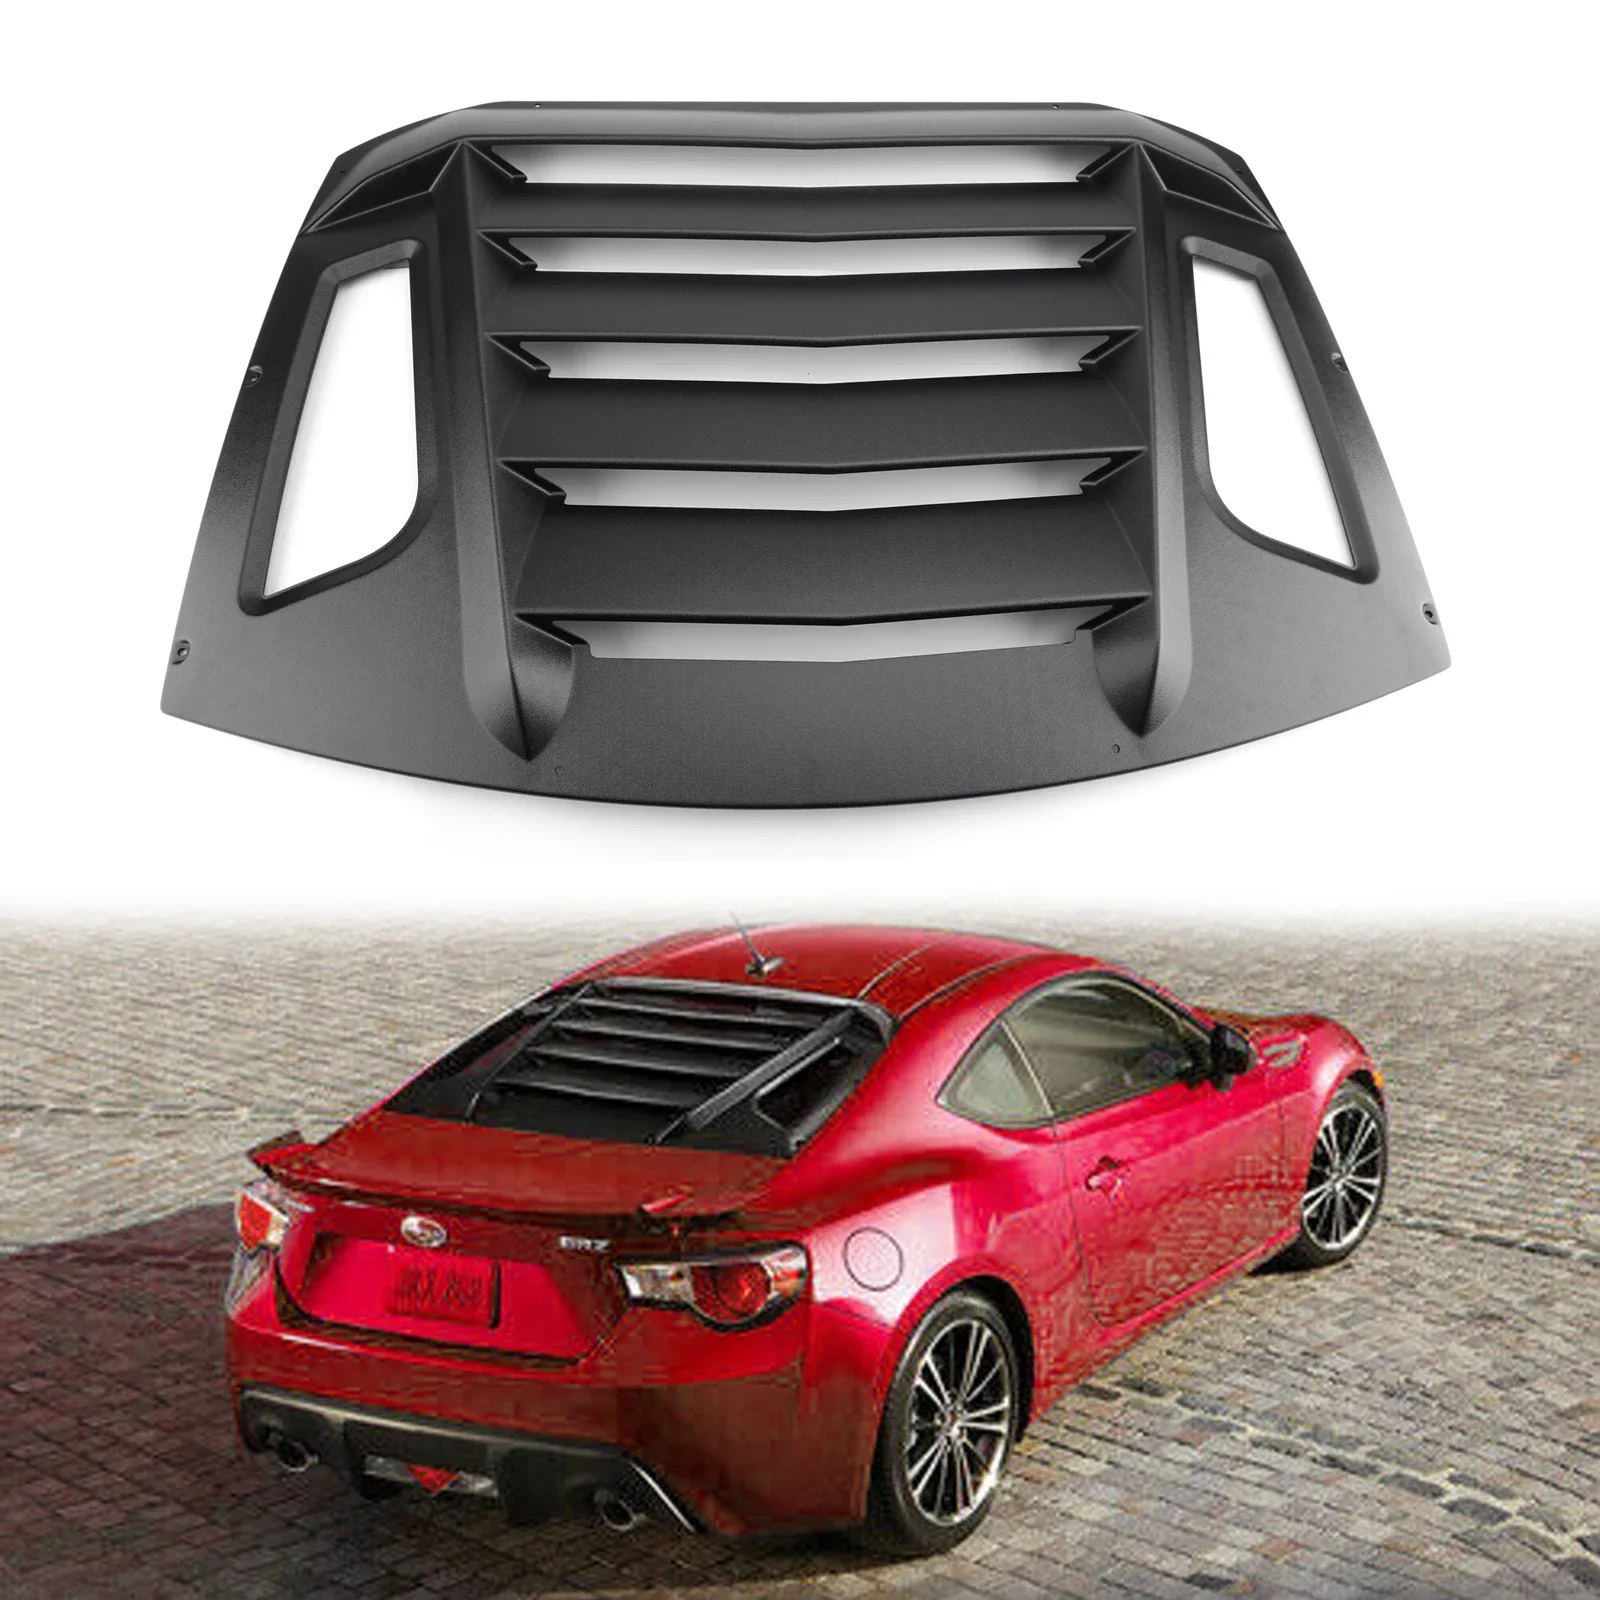 Areyourshop Rear Window Louver Sun Shade Cover For Subaru BRZ/Scion FR-S For  GT86 2013-2018 custom for toyota 86 armrest for subaru brz car armrest box right hand drive for scion fr s frs gt86 2012 2020 storage box auto parts